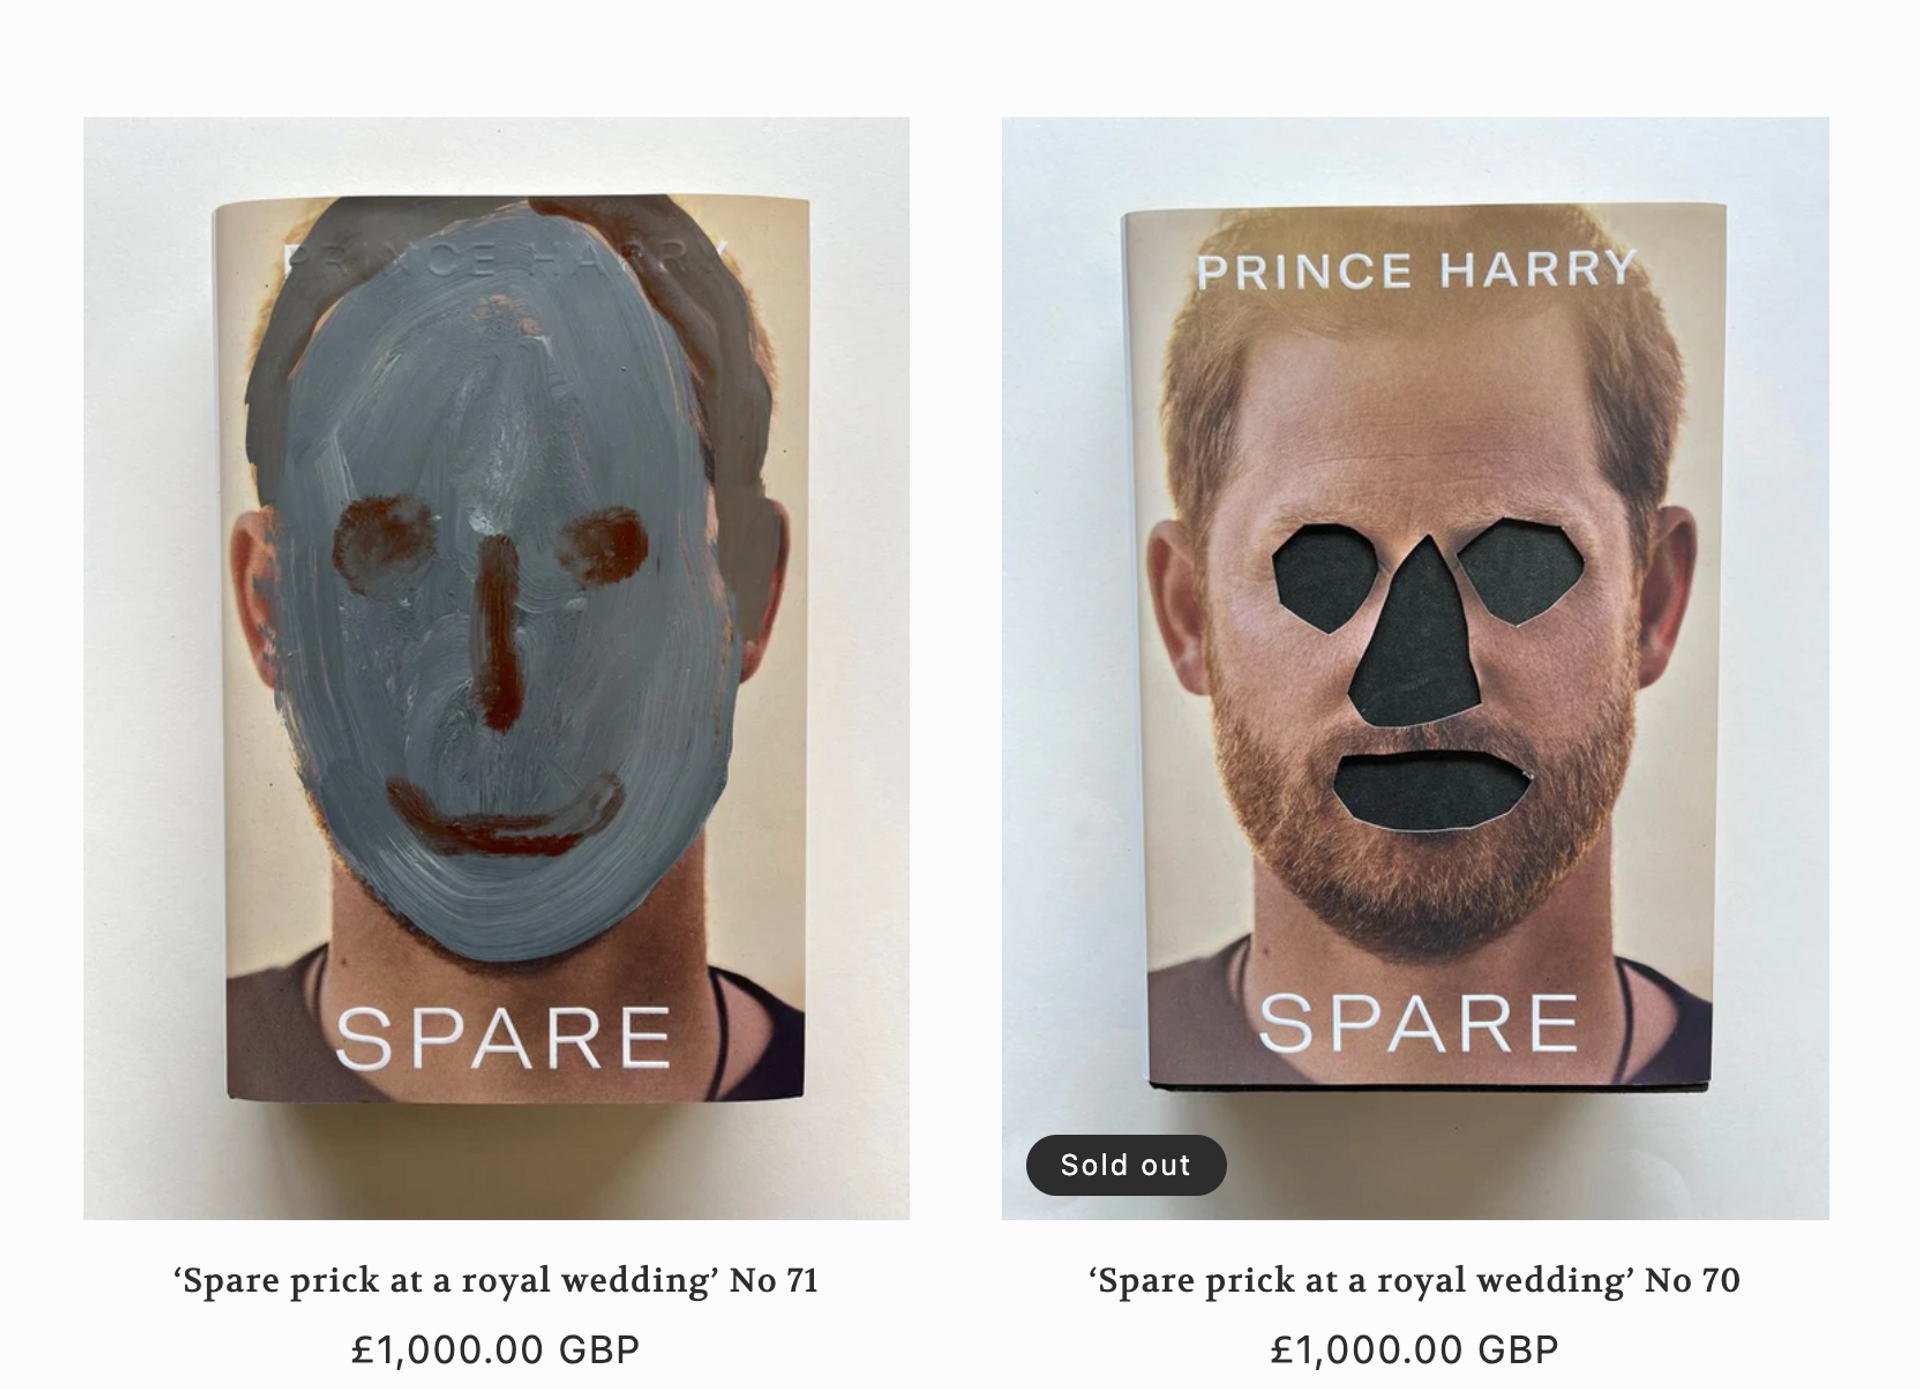 Two works from Jake Chapman’s Spare prick at a royal wedding series © Heimlich Production

